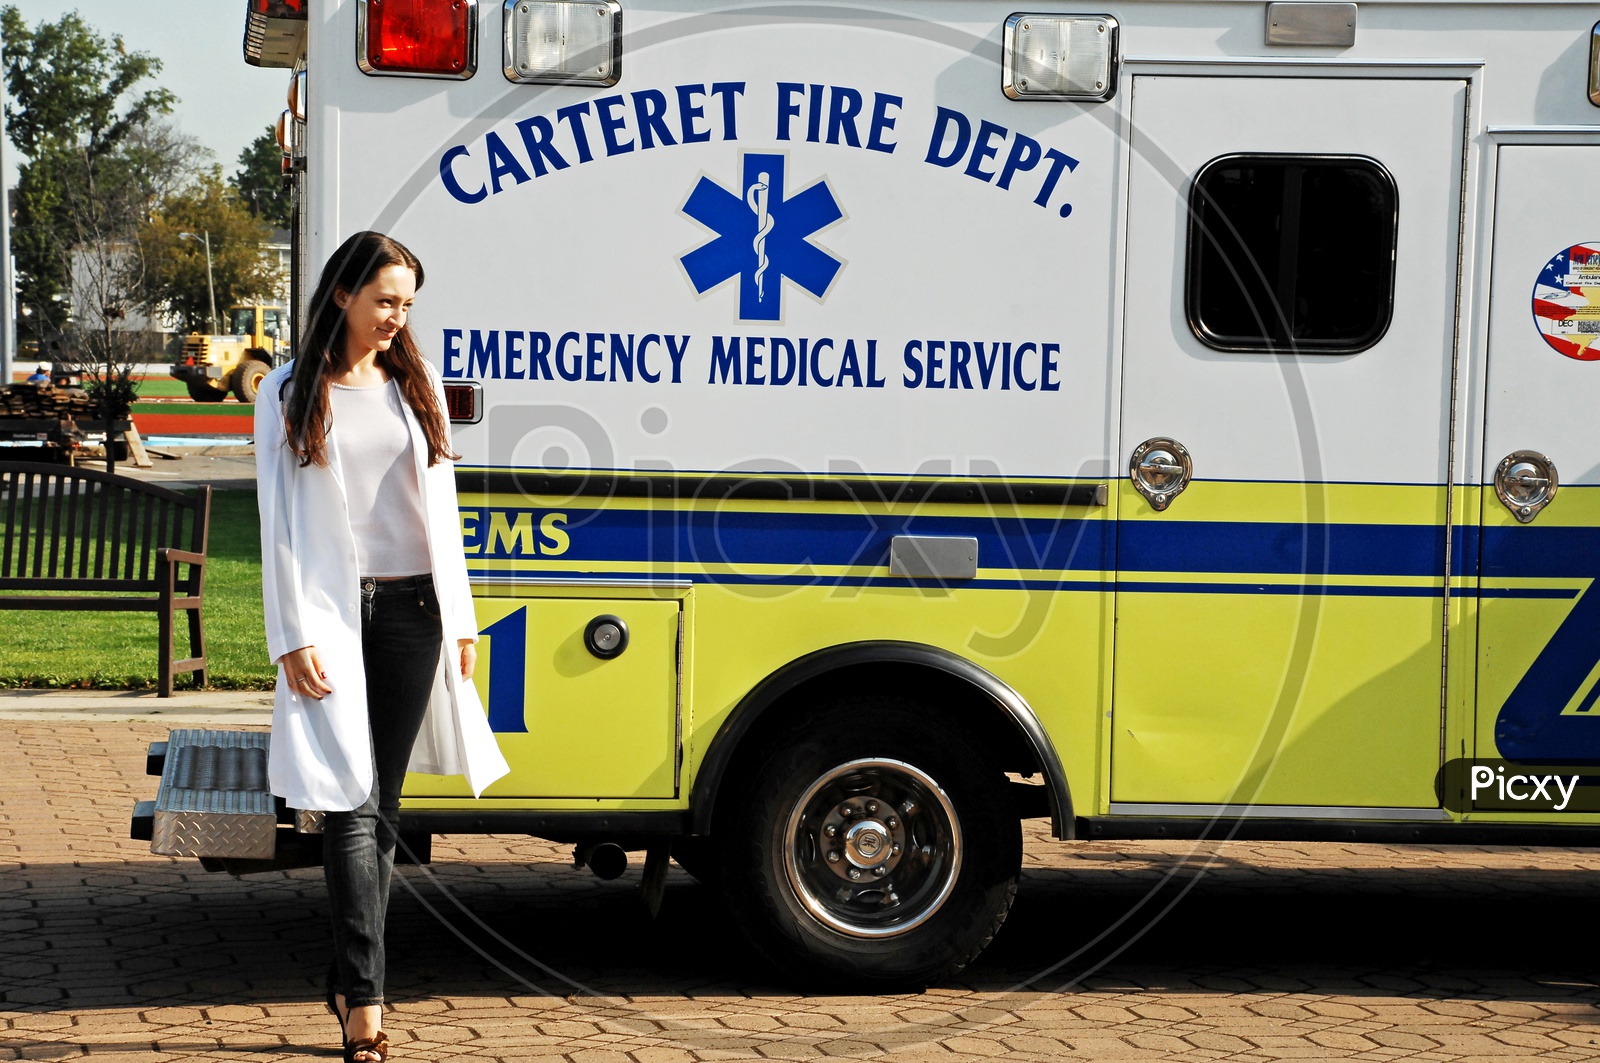 A Female Doctor beside the ambulance